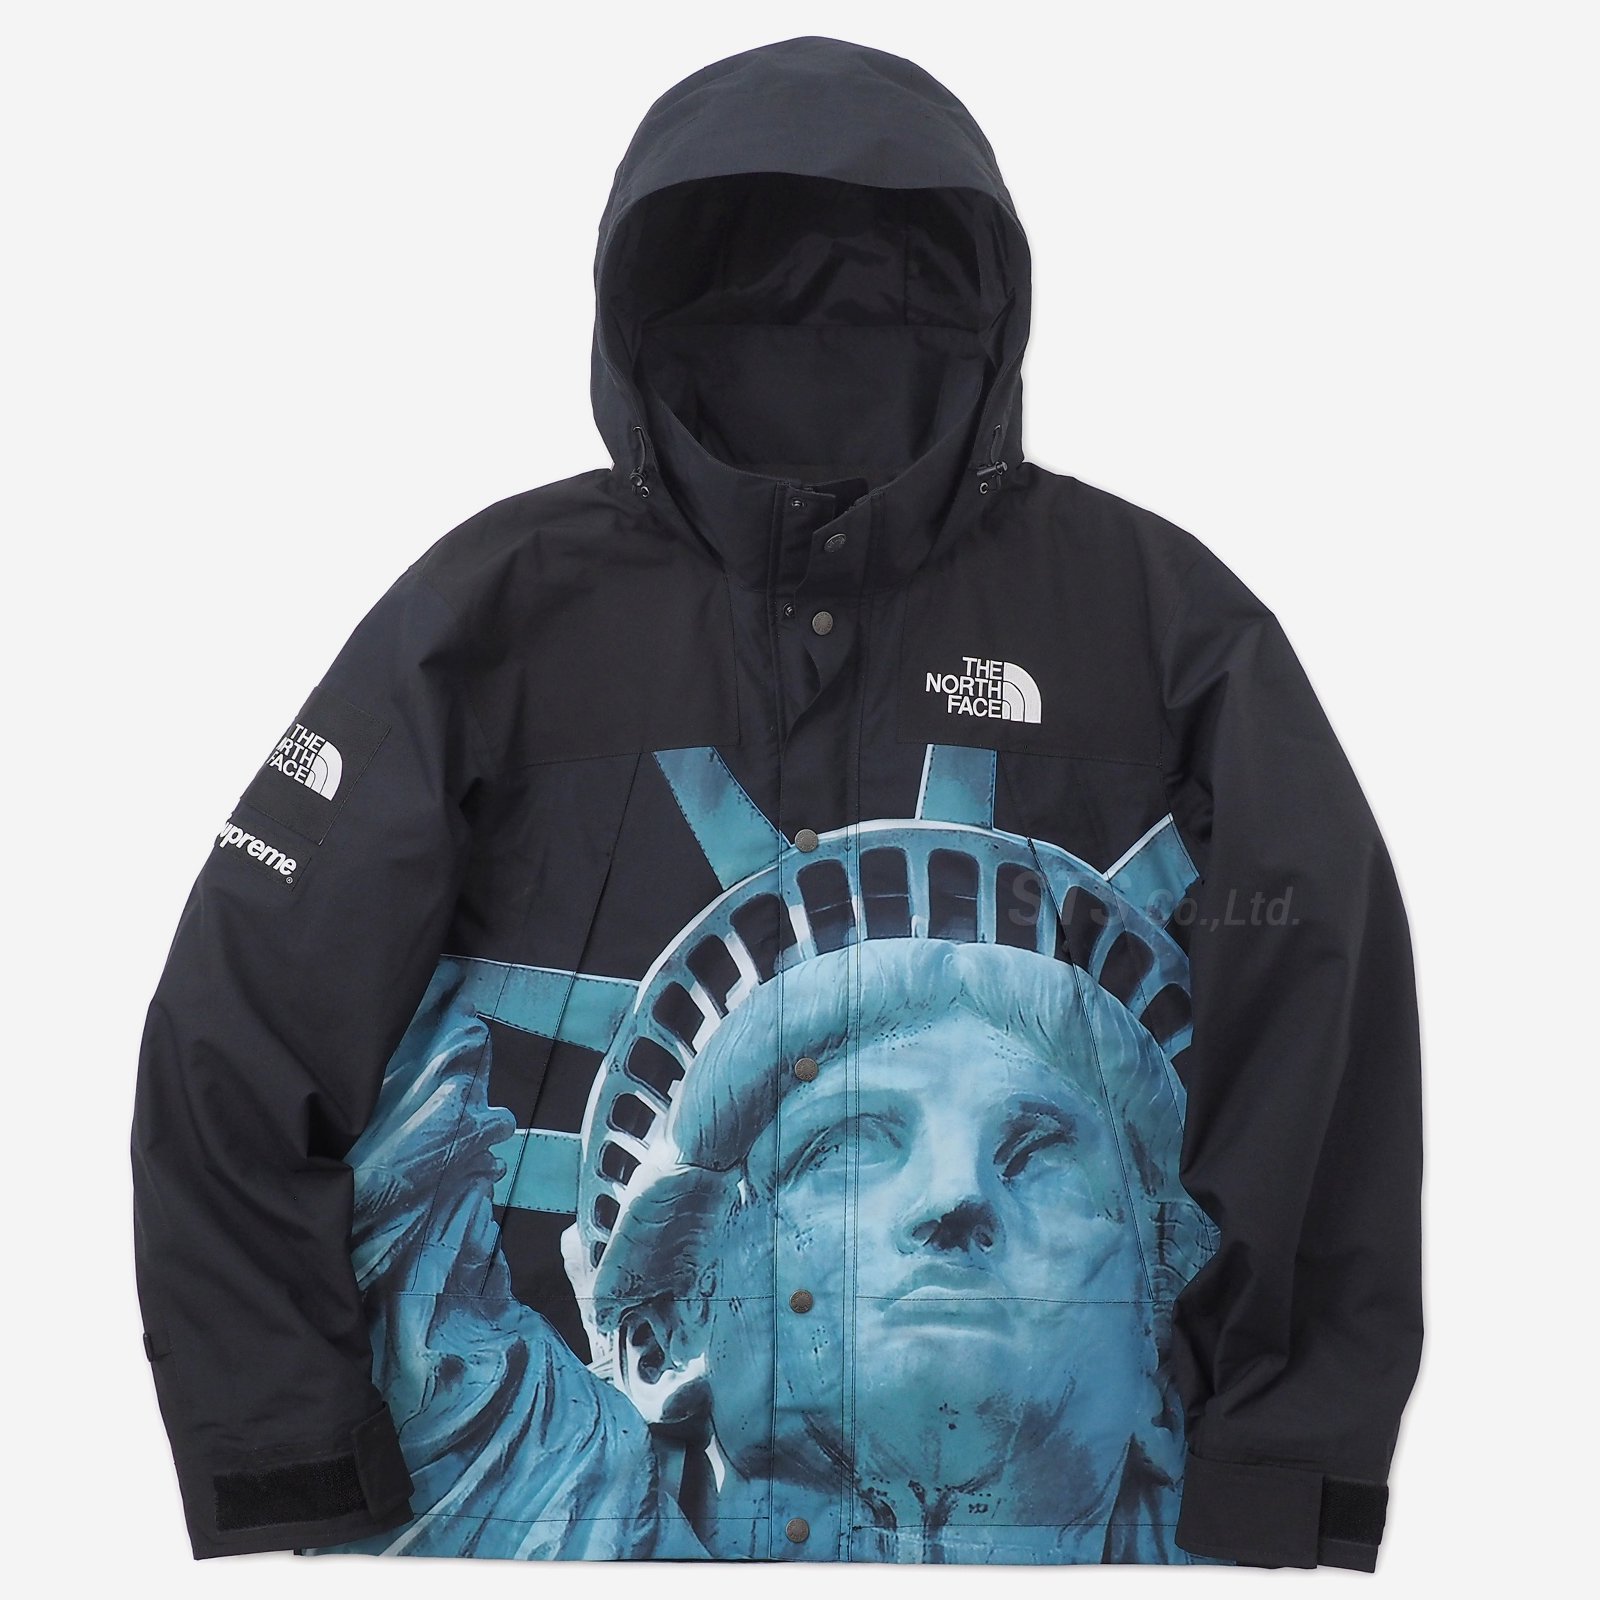 Supreme/The North Face Statue of Liberty Mountain Jacket - ParkSIDER